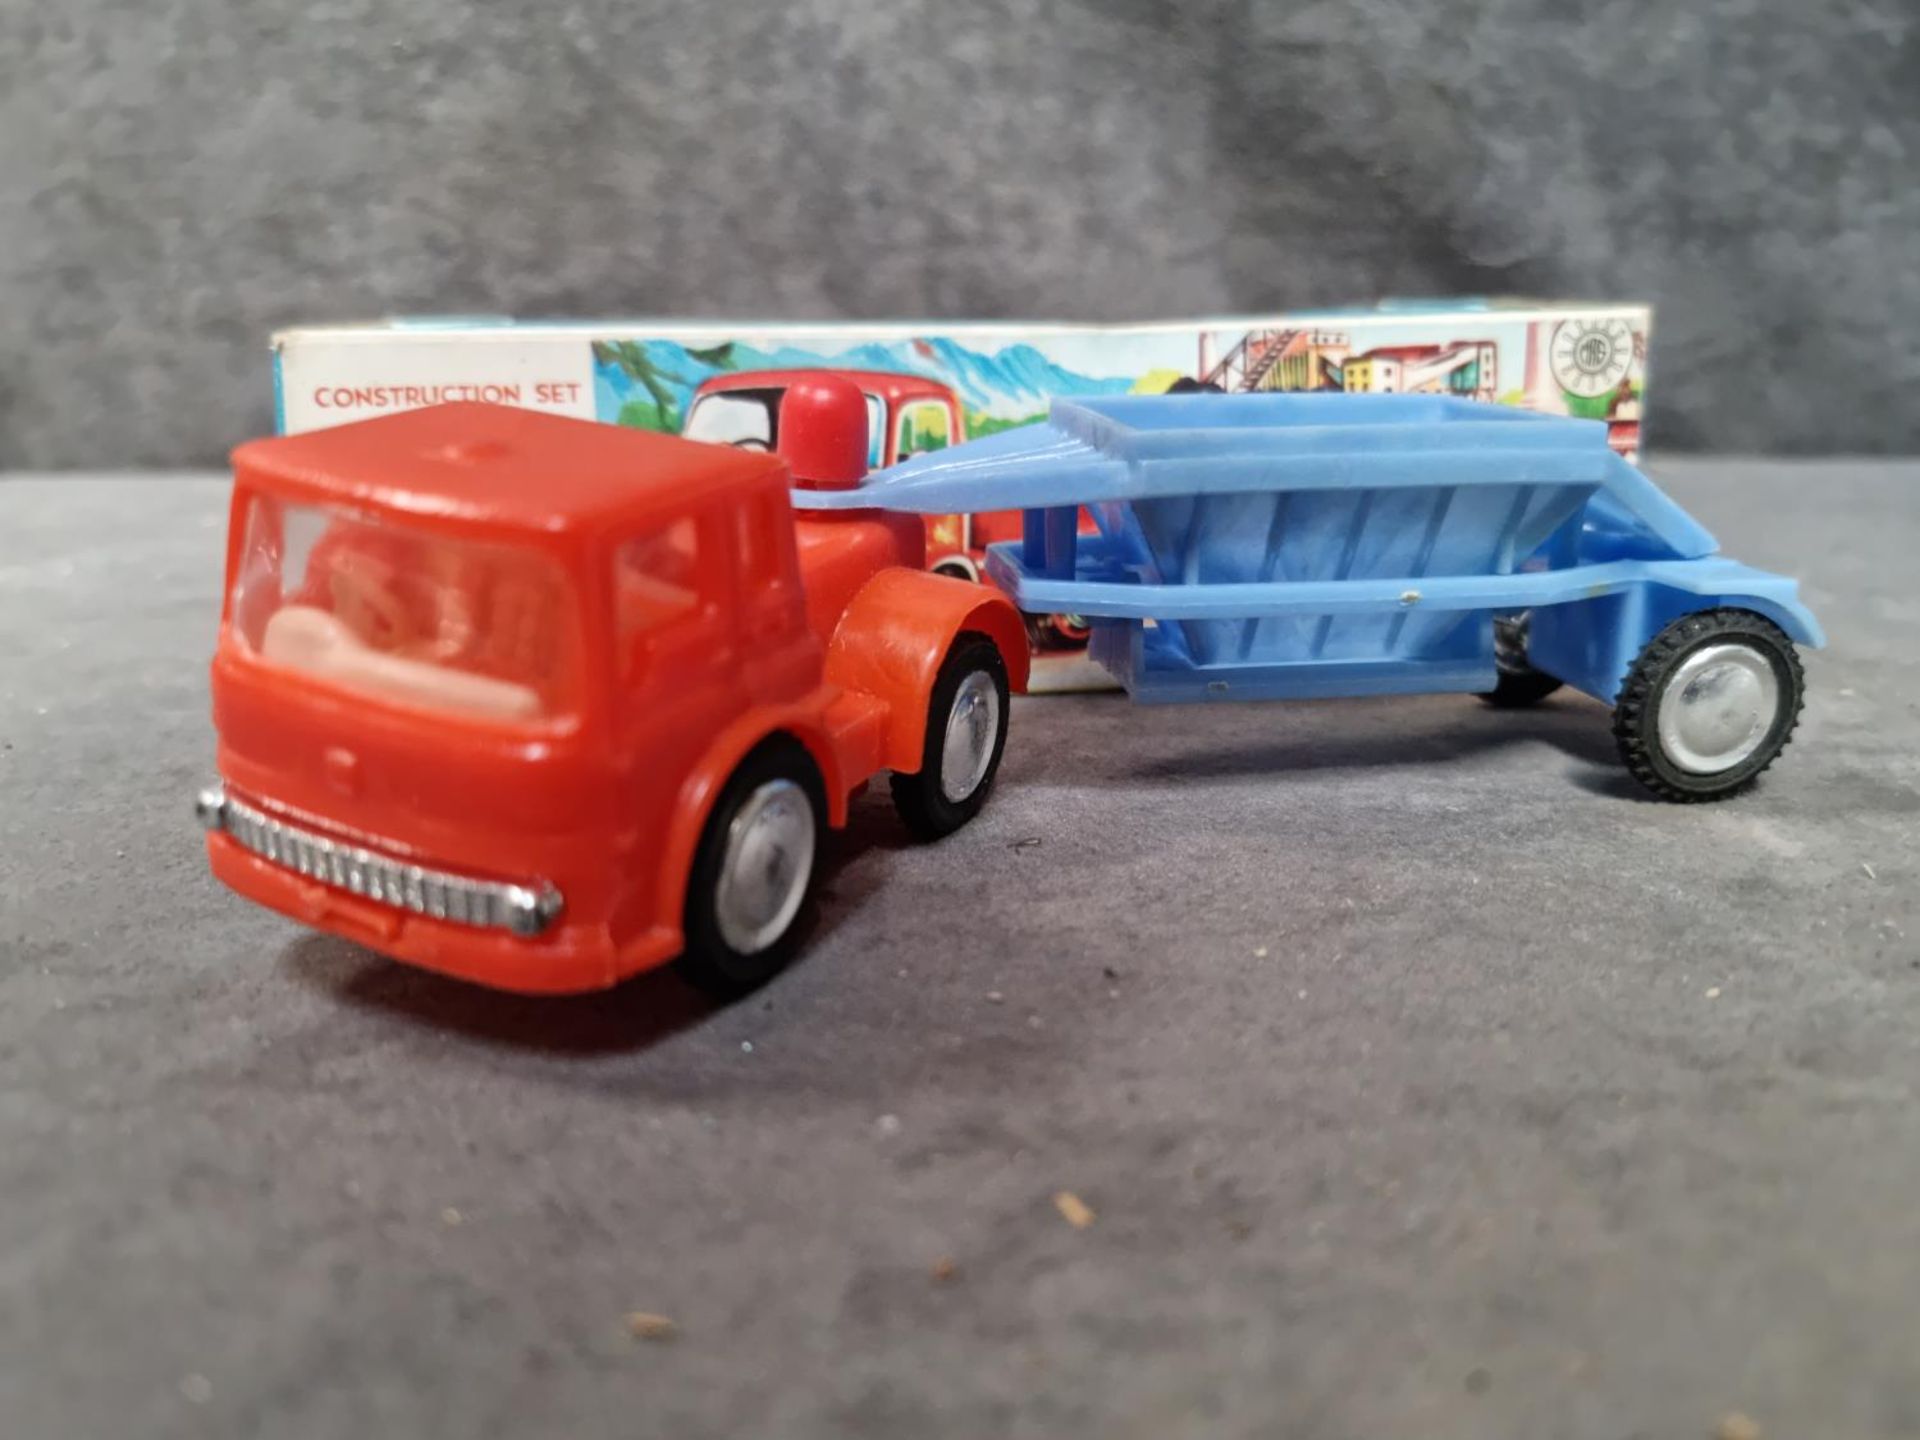 Construction Set Dump Truck With Friction Drive #1006 Made In Hong Kong